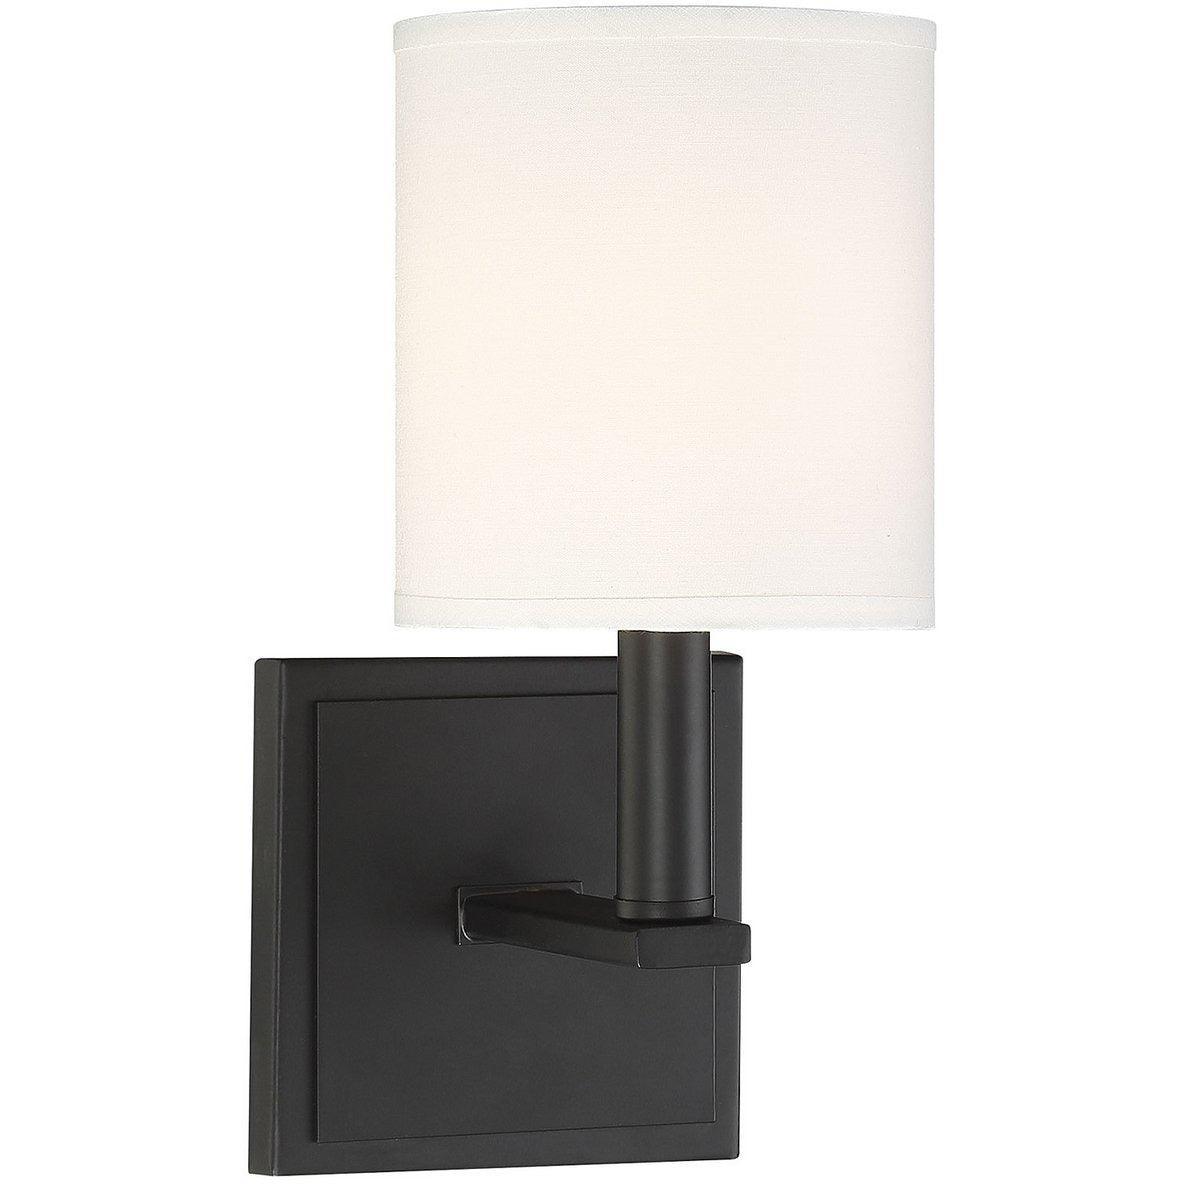 Savoy House - Waverly One Light Wall Sconce - 9-1200-1-89 | Montreal Lighting & Hardware